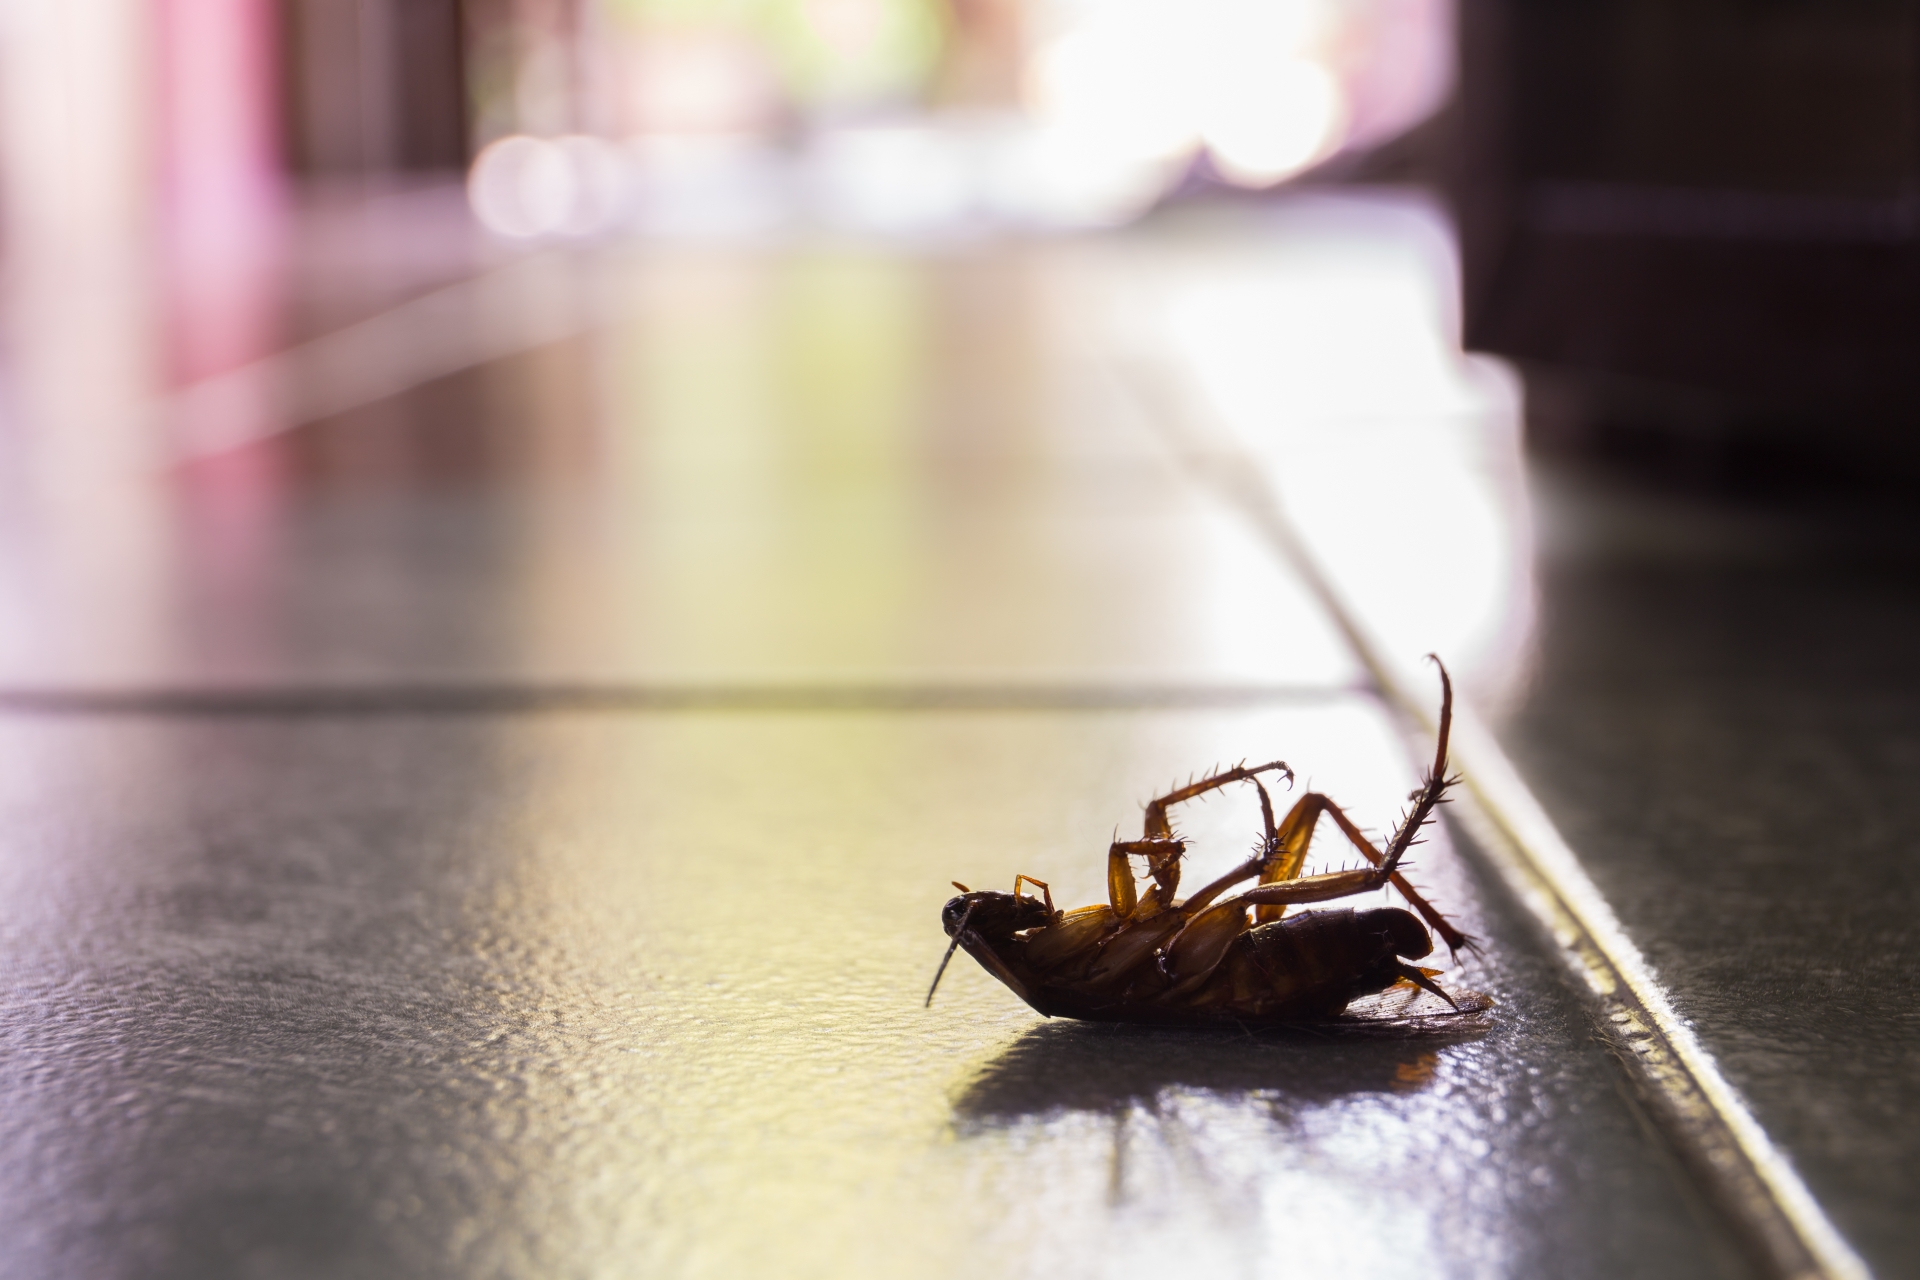 Cockroach Control, Pest Control in Canbury, Coombe, KT2. Call Now 020 8166 9746